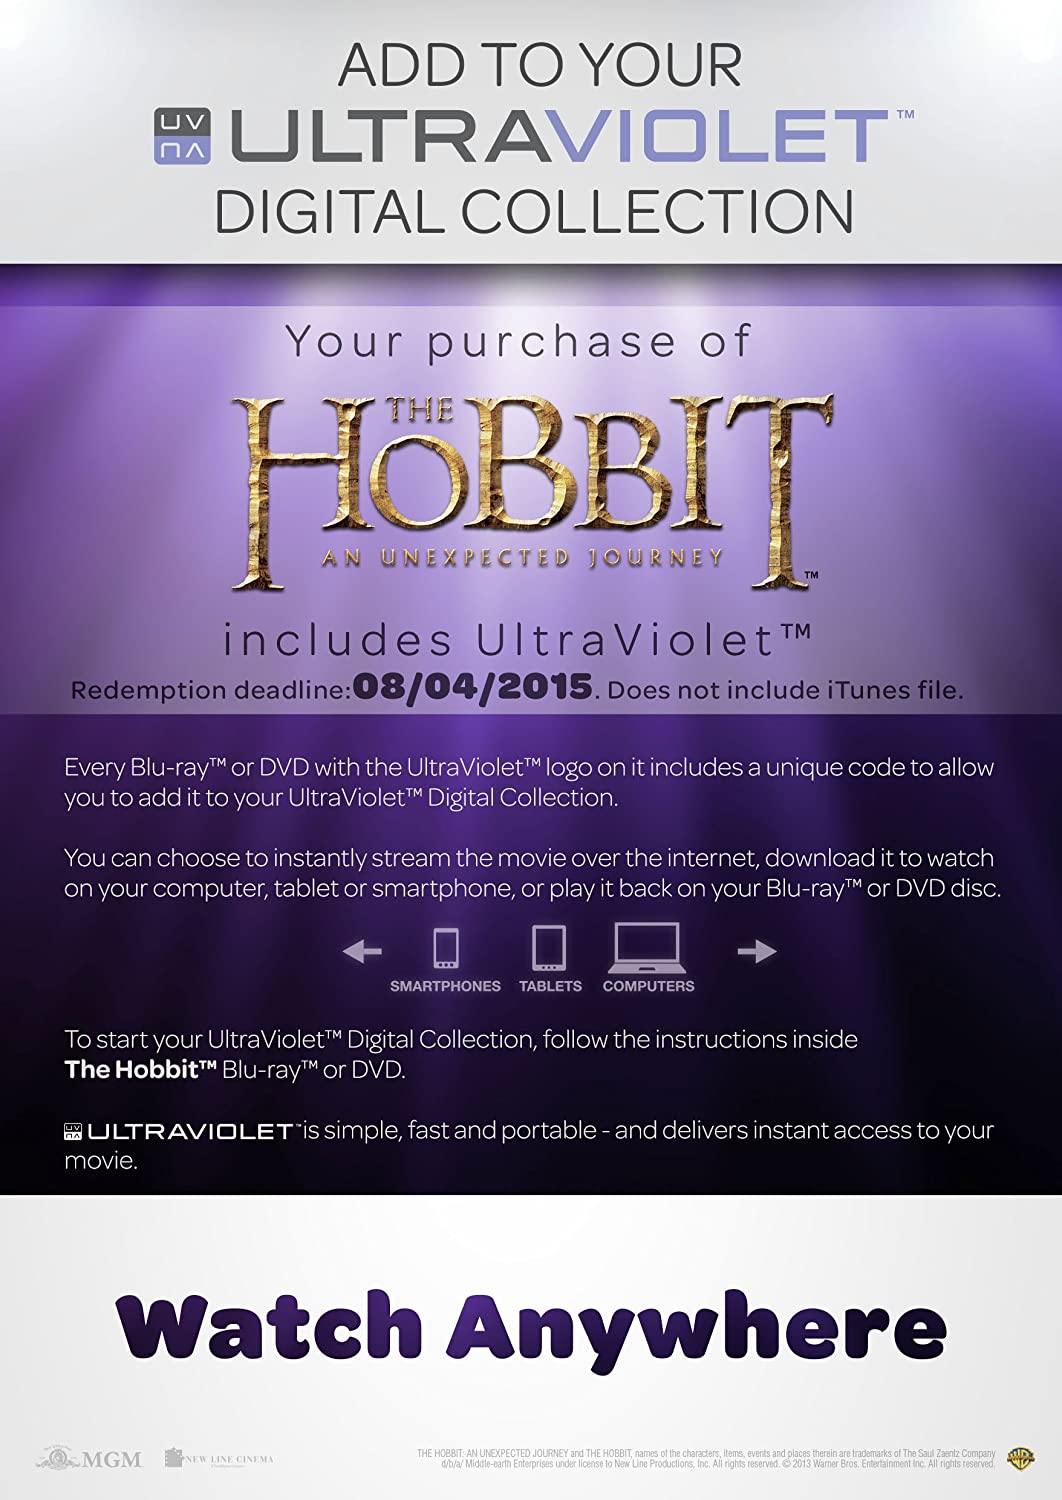 The Hobbit: An Unexpected Journey [Blu-ray 3D + Blu-ray + UV Copy] [2013] [Region Free]